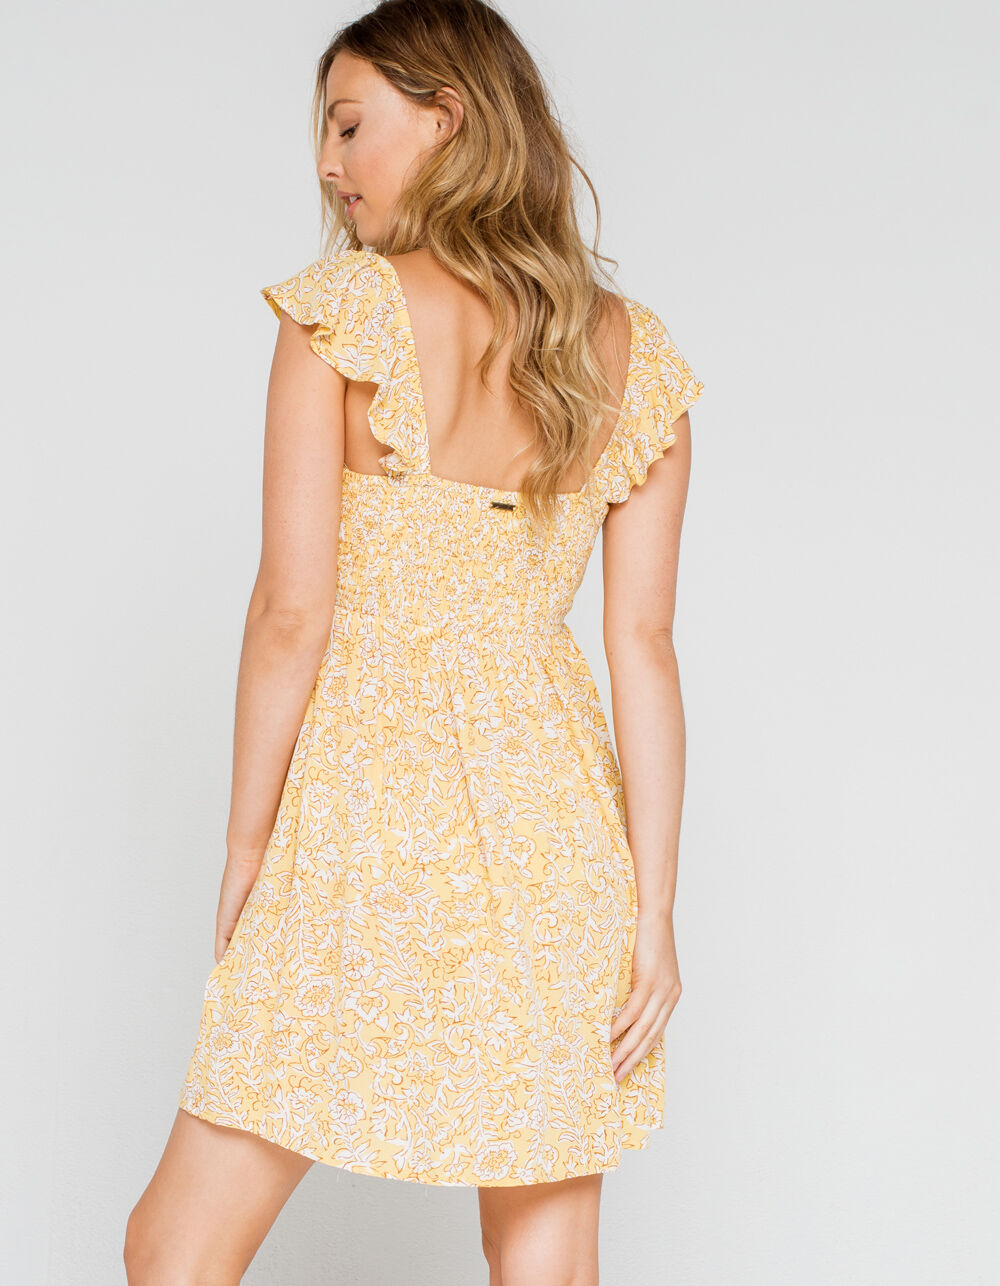 BILLABONG Forever Yours Yellow Dress - YELLOW COMBO | Tillys